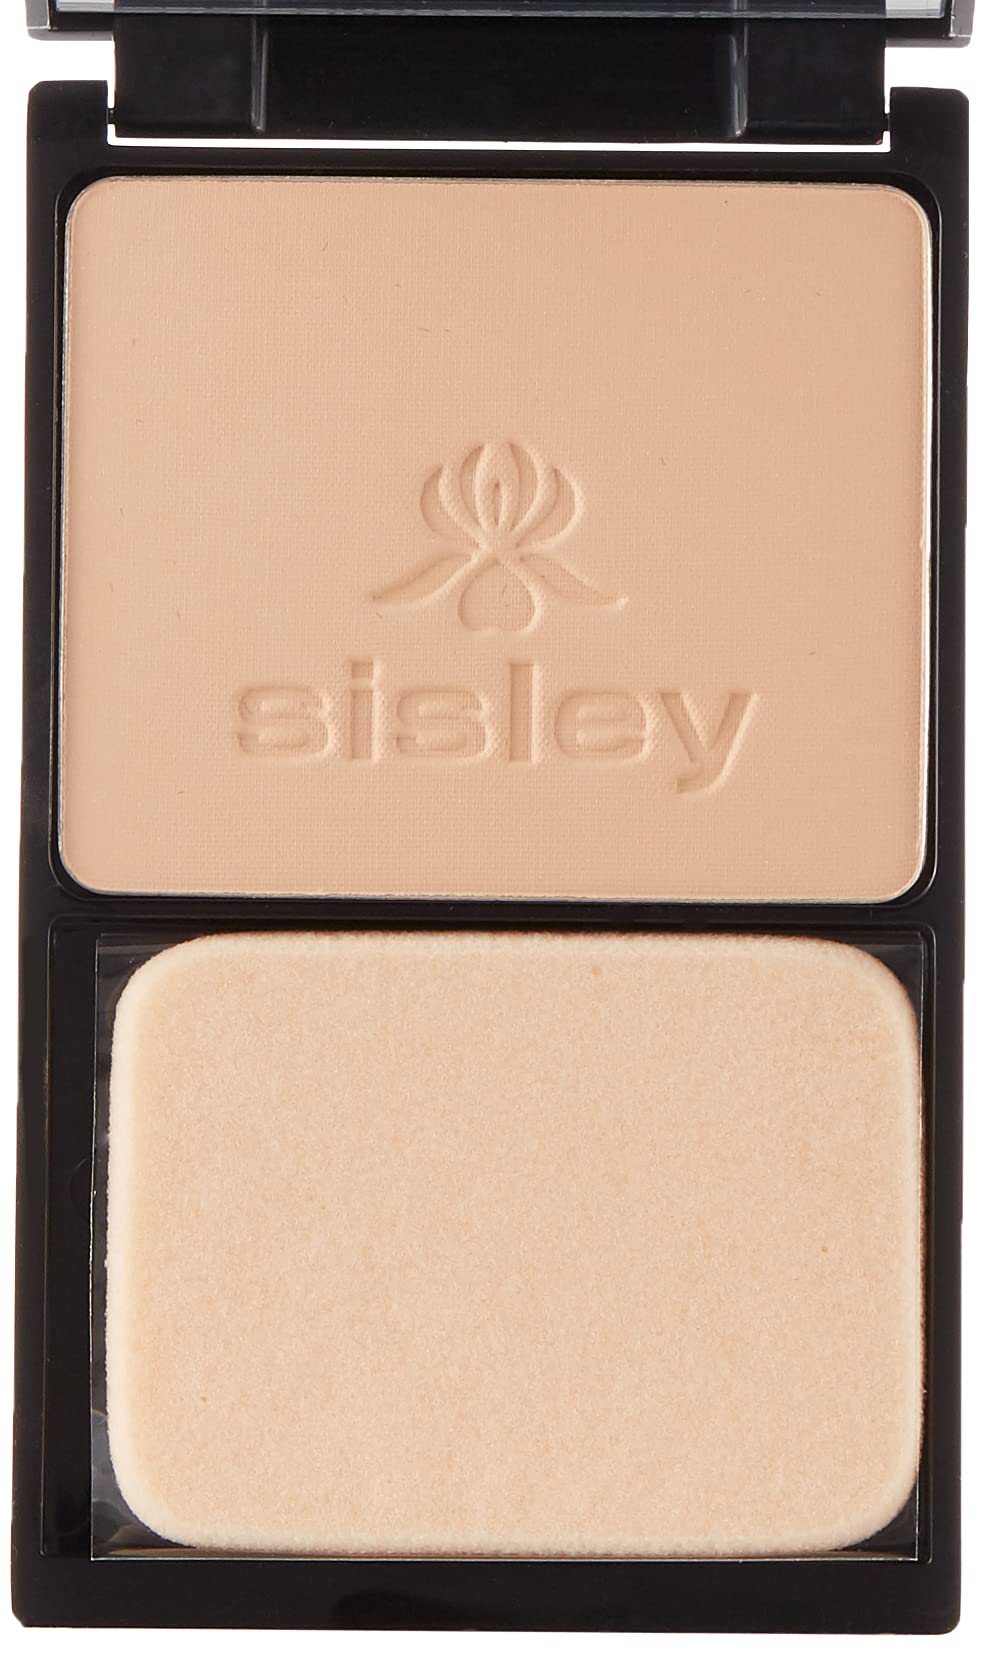 Sisley Phyto Teint Eclat Compact Foundation No. 2 Soft Beige for Women, 0.35 Ounce